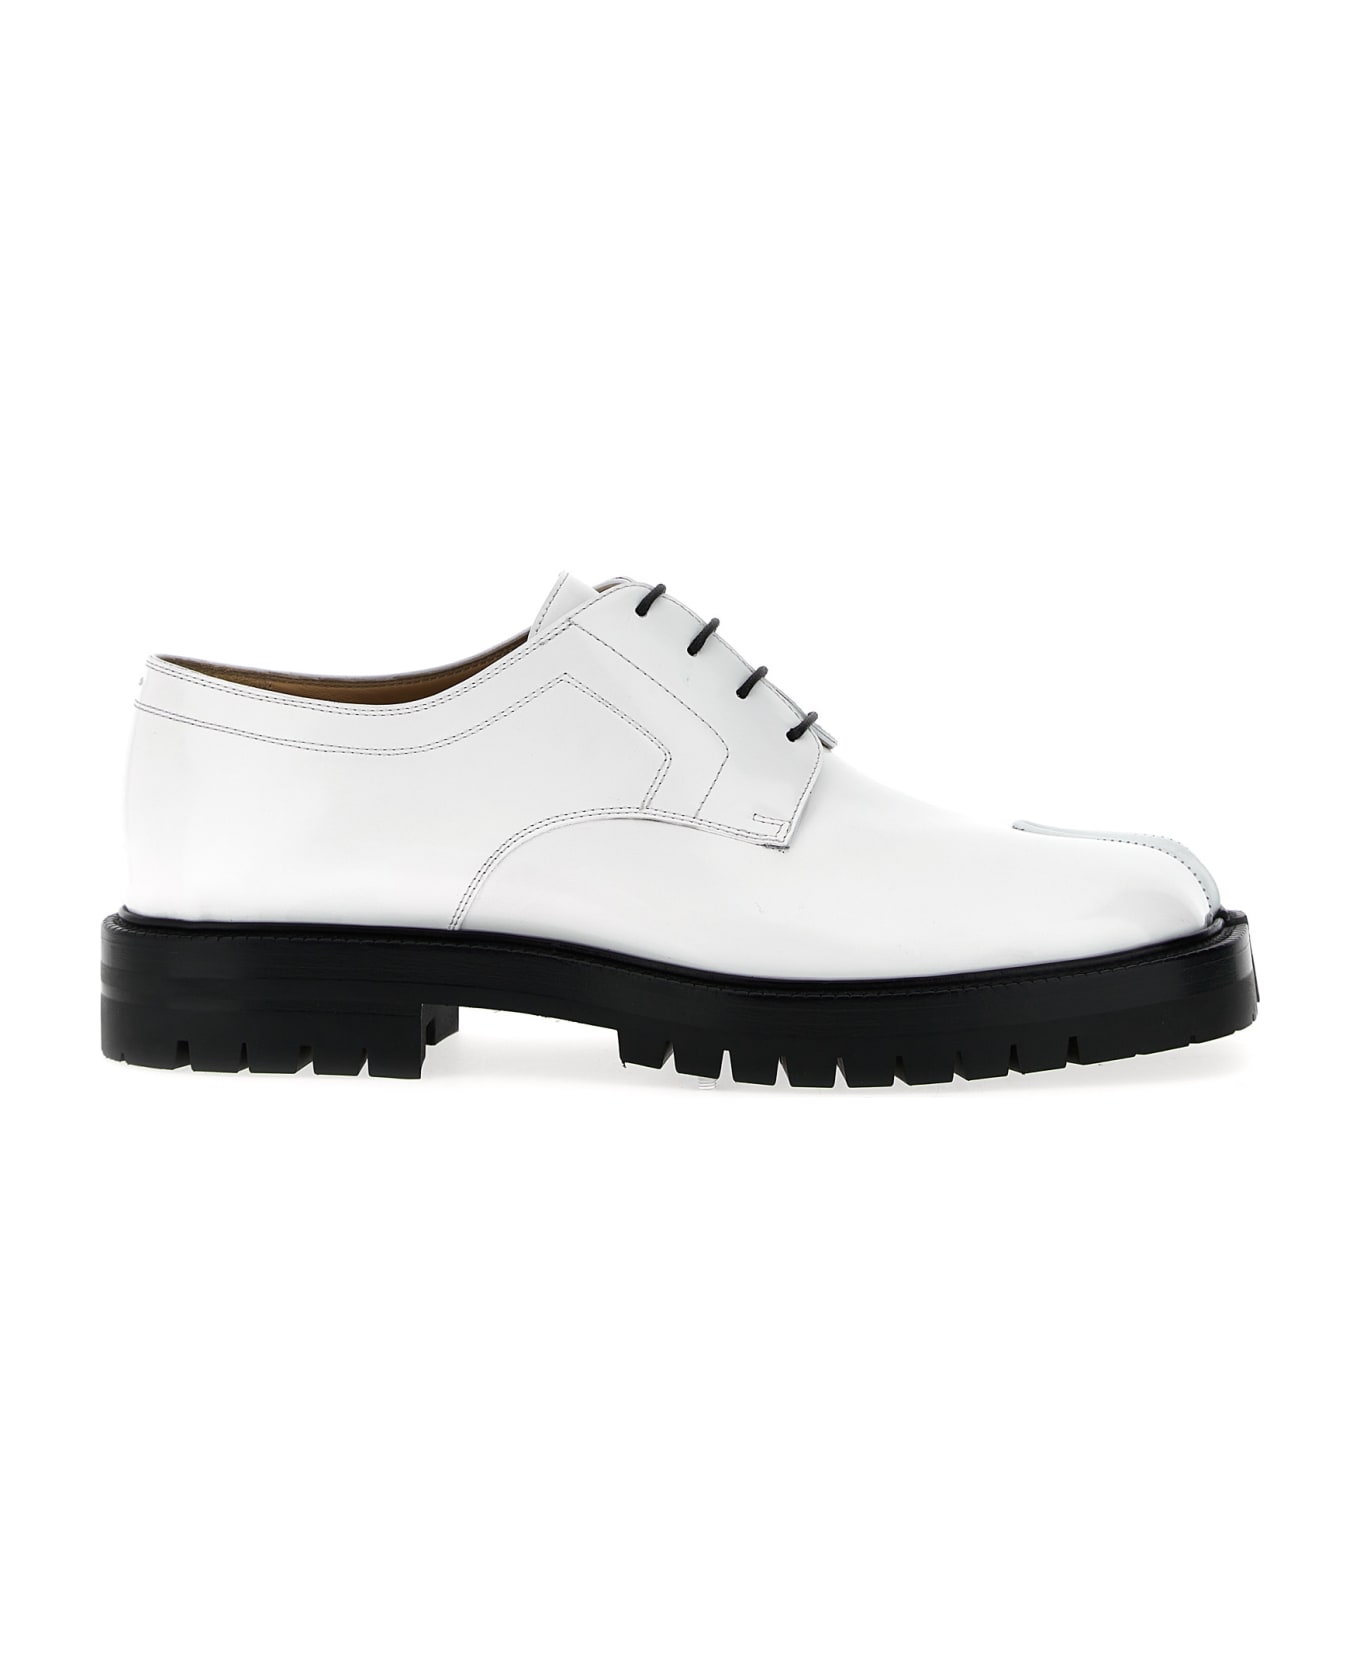 Maison Margiela 'taby Country' Lace Up Shoes - White/Black